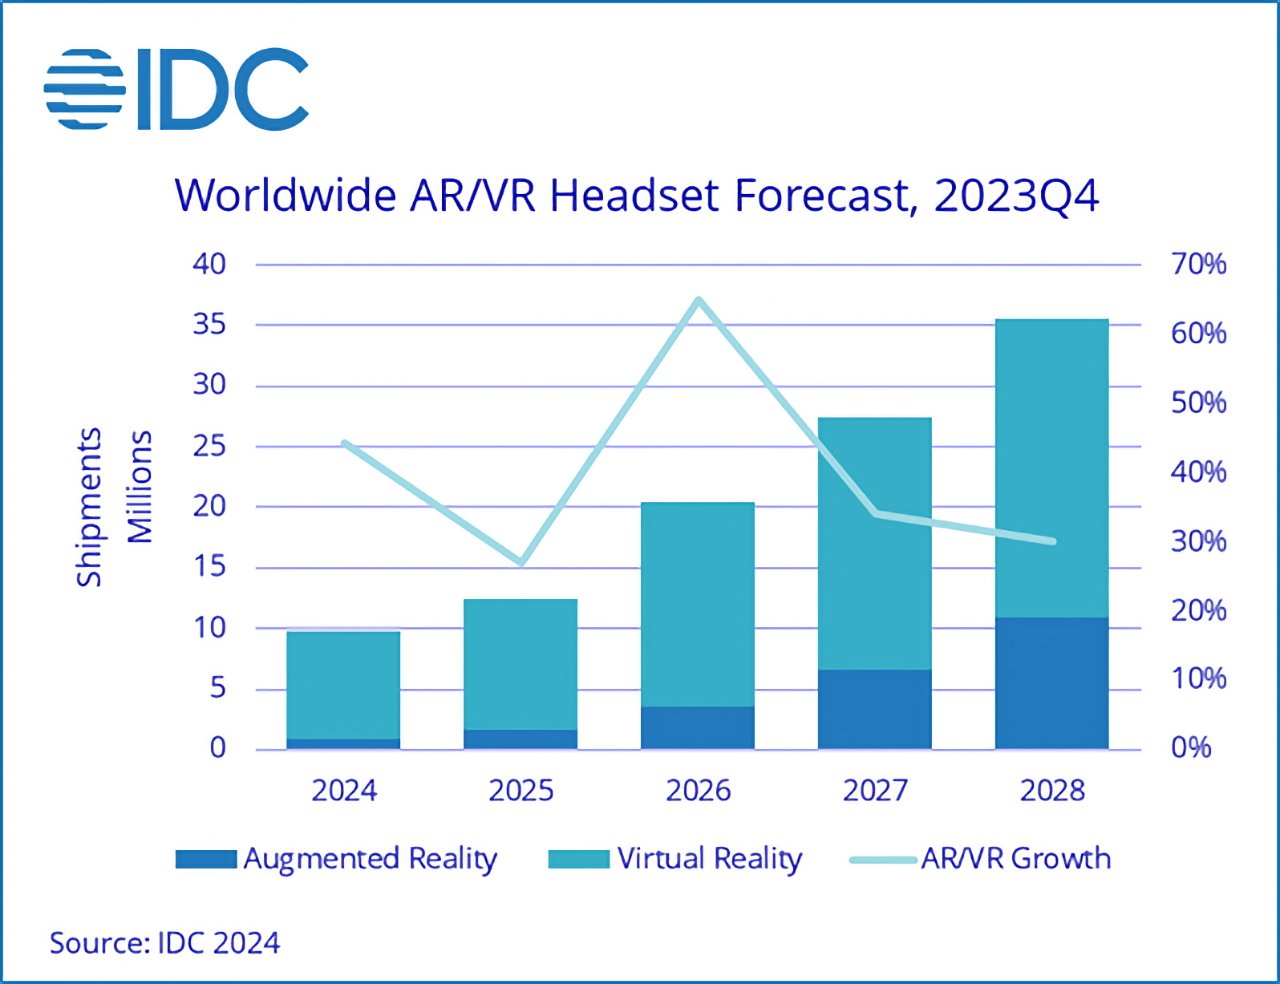 Bar chart showing forecasted worldwide AR/VR headset shipments, with a line graph for growth percentage, from 2024 to 2028 by IDC.